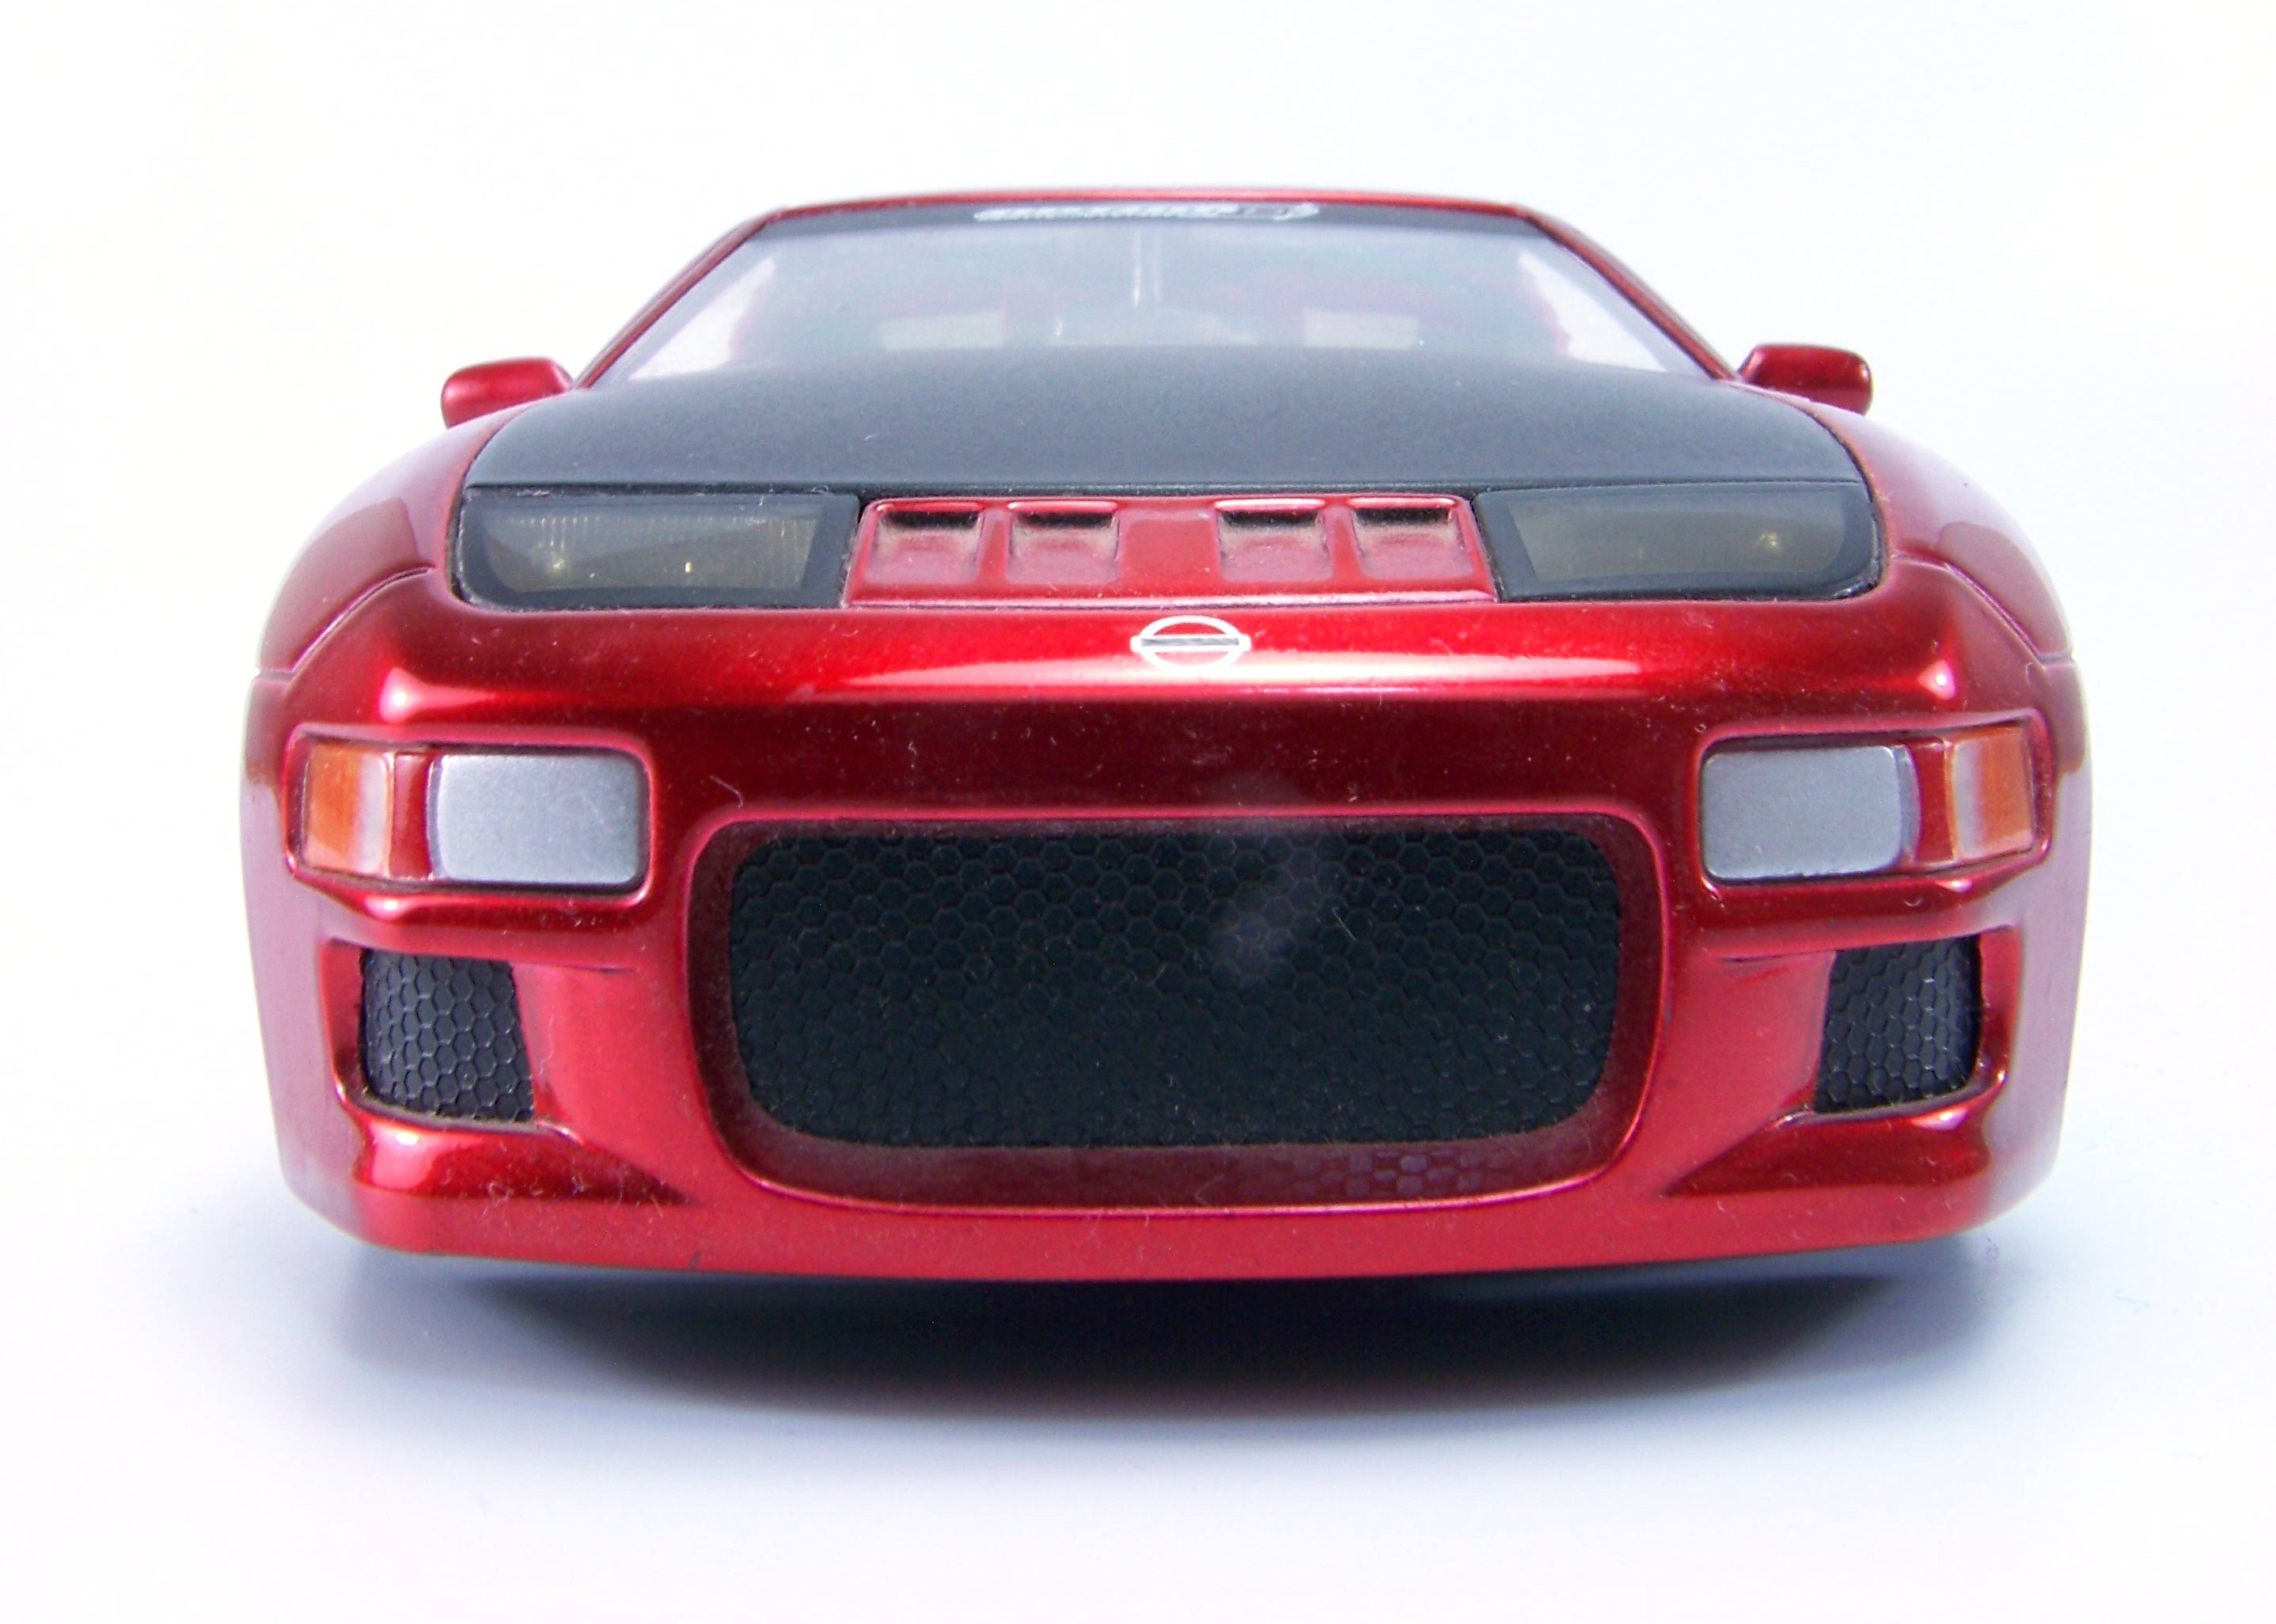 Red toy car photo